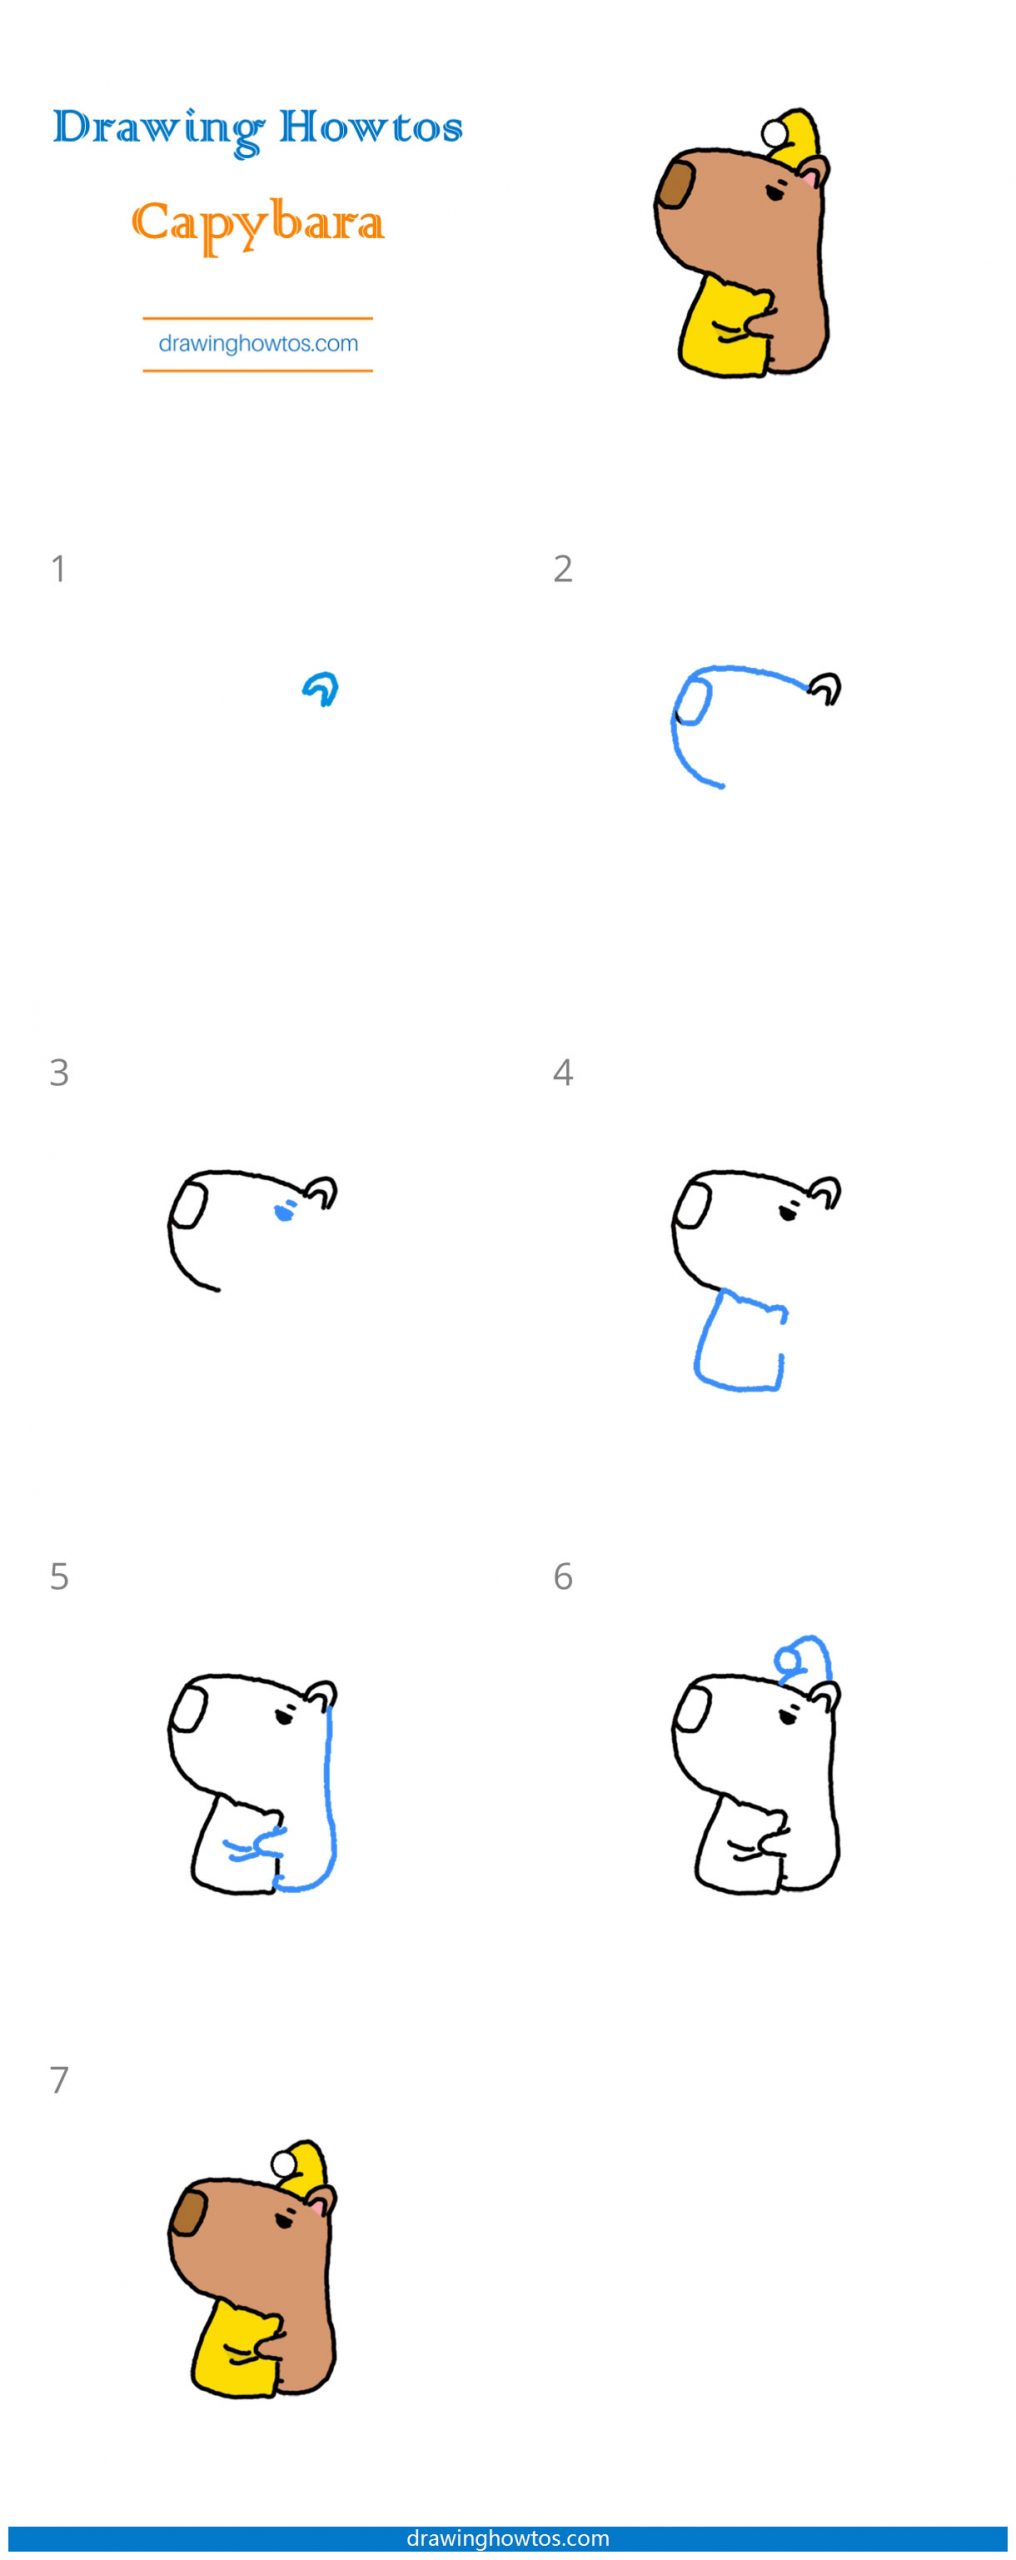 How to Draw a Cute Capybara Step by Step